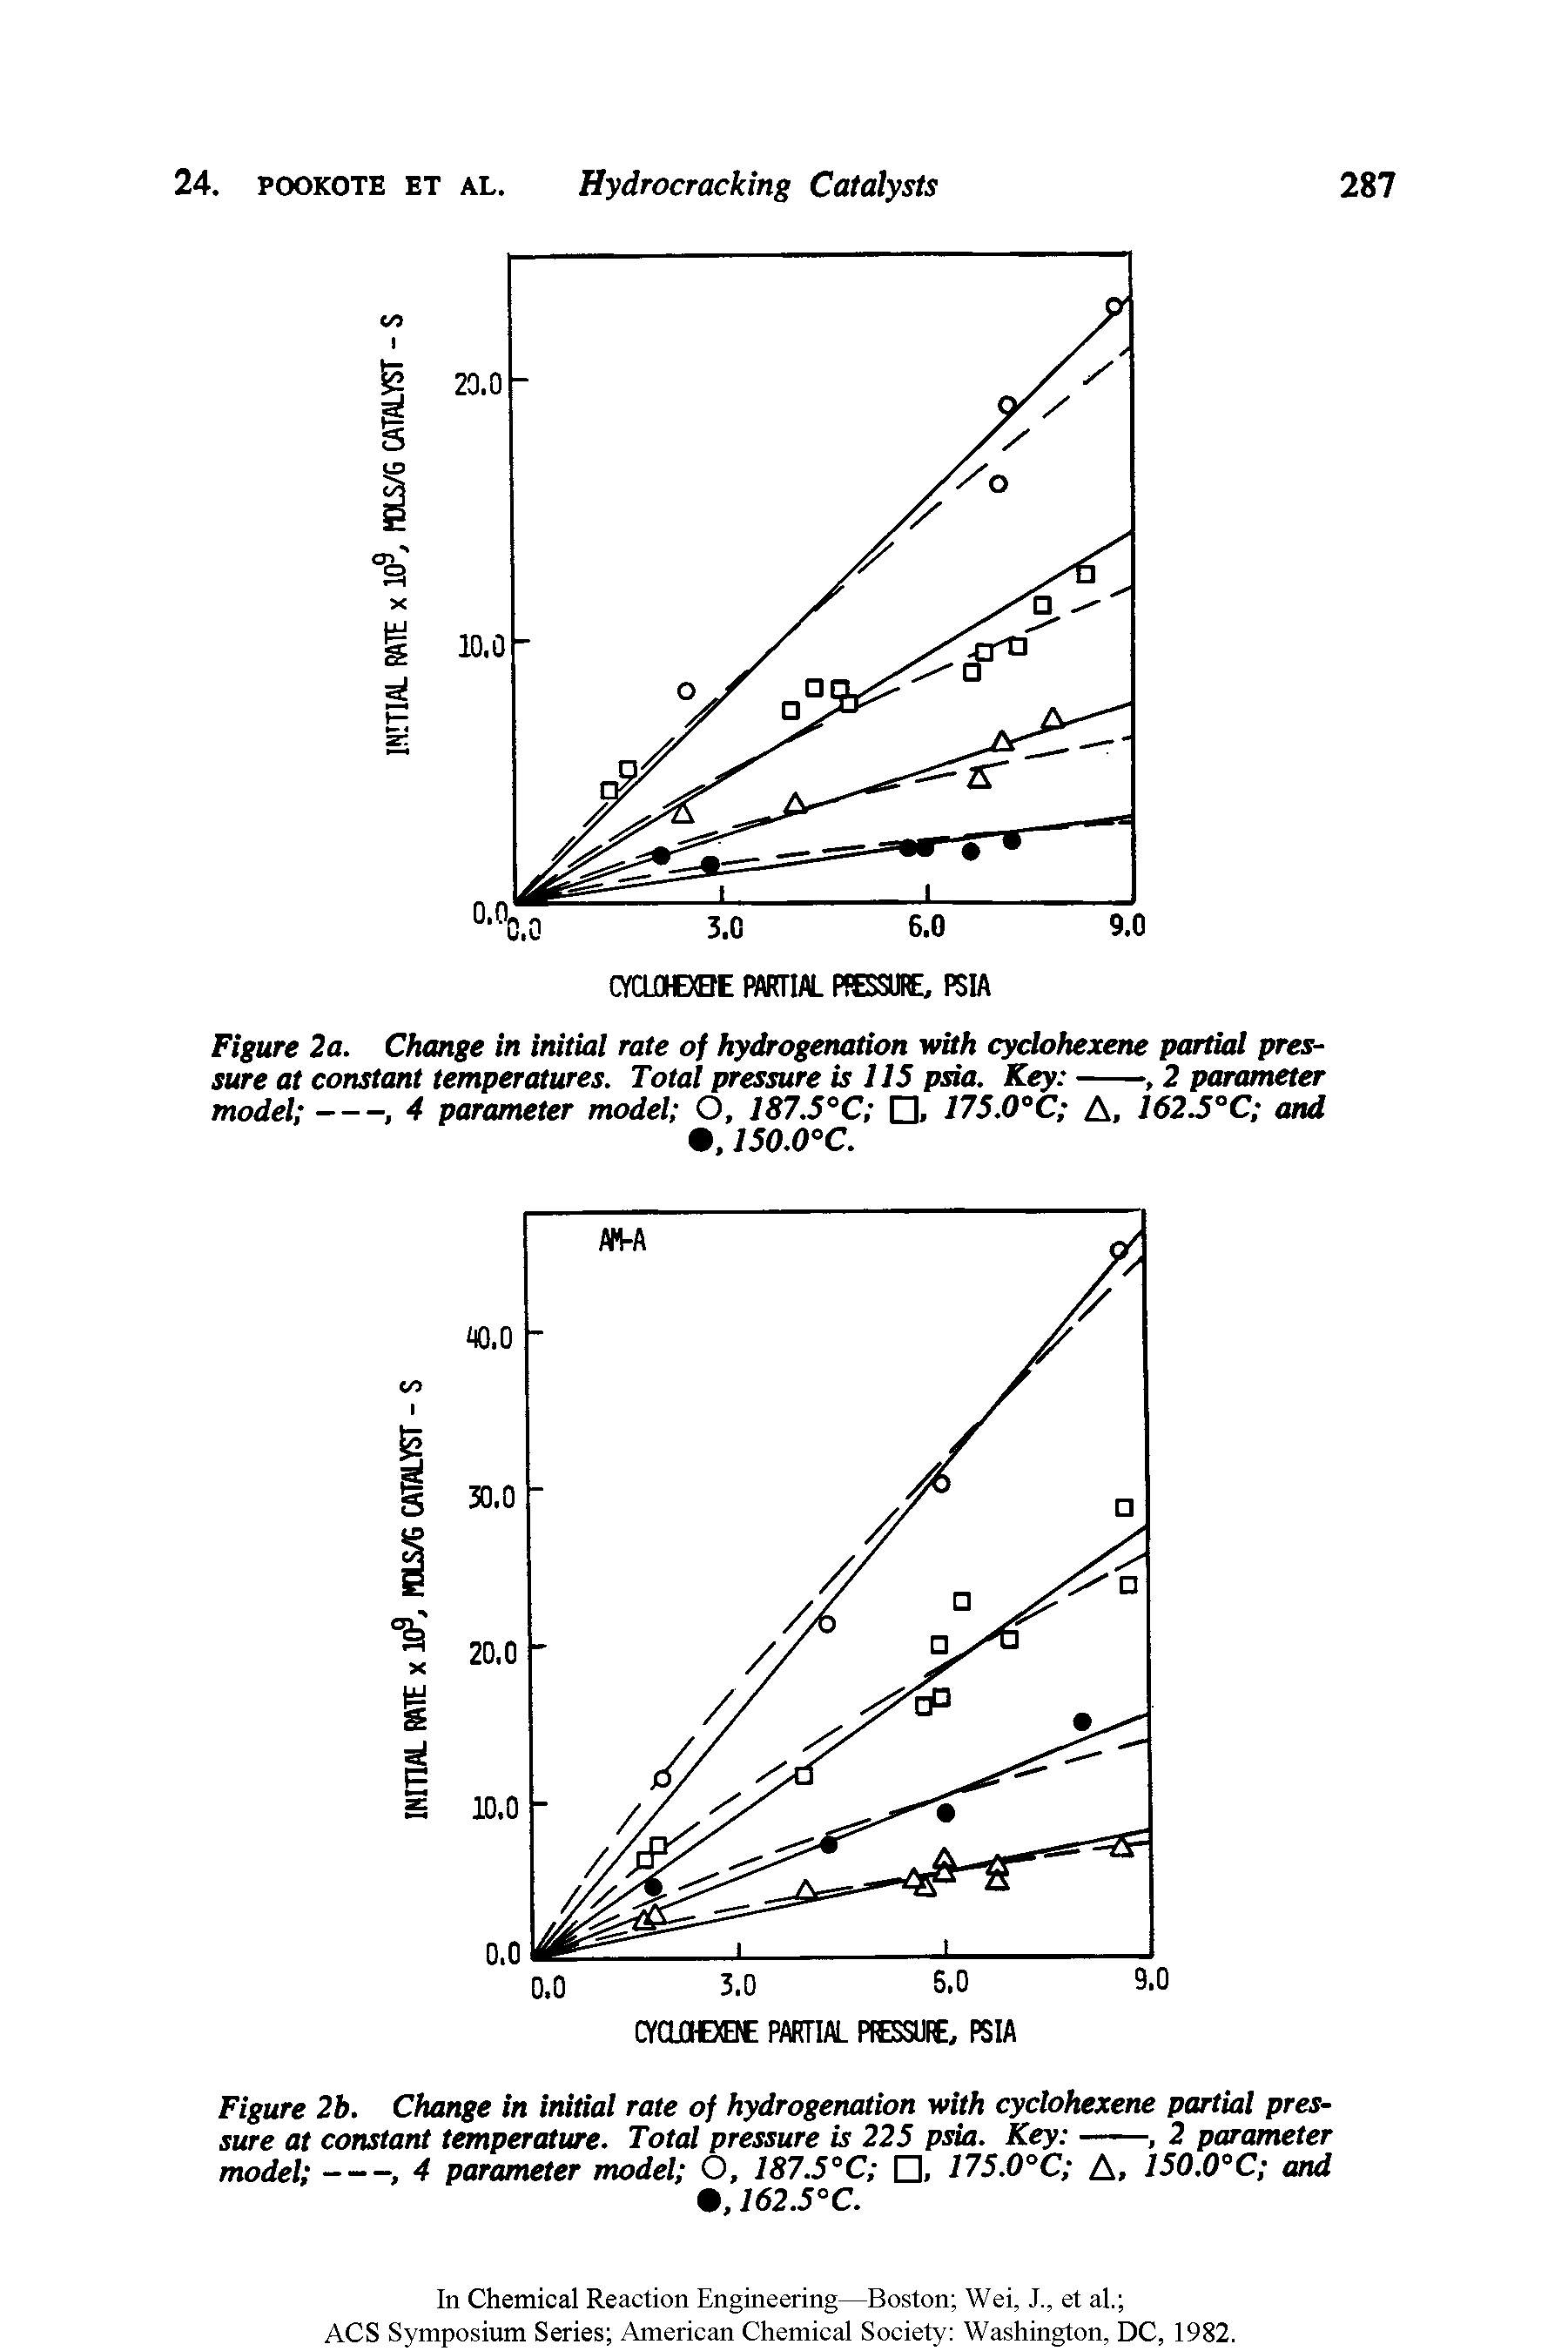 Figure 2a. Change in initial rate of hydrogenation with cyclohexene partial pressure at constant temperatures. Total pressure is 115 psia. Key -,2 parameter...